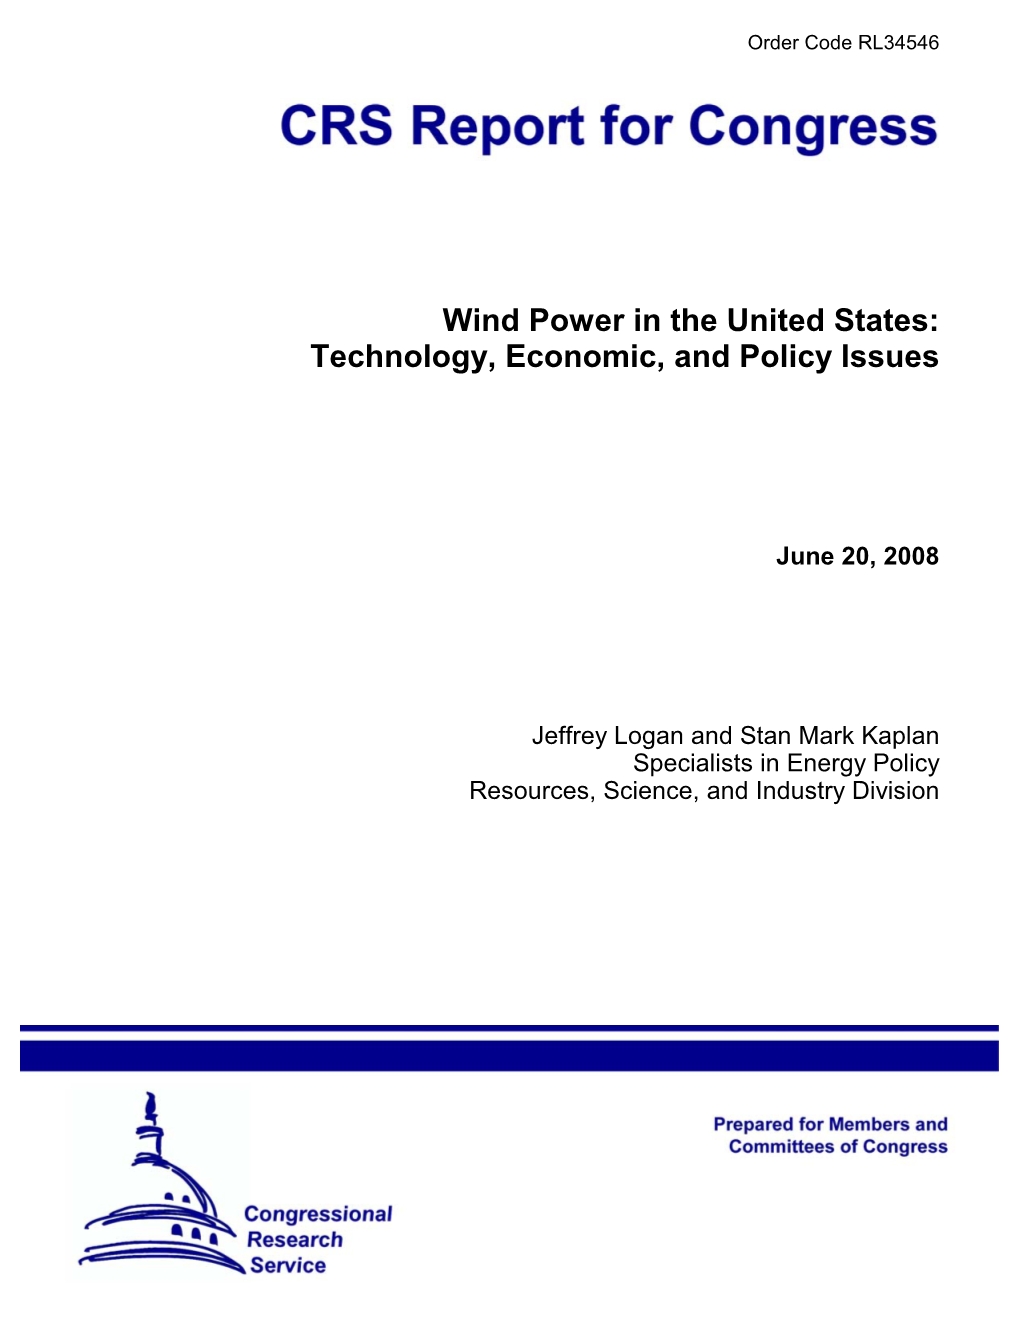 Wind Power in the United States: Technology, Economic, and Policy Issues